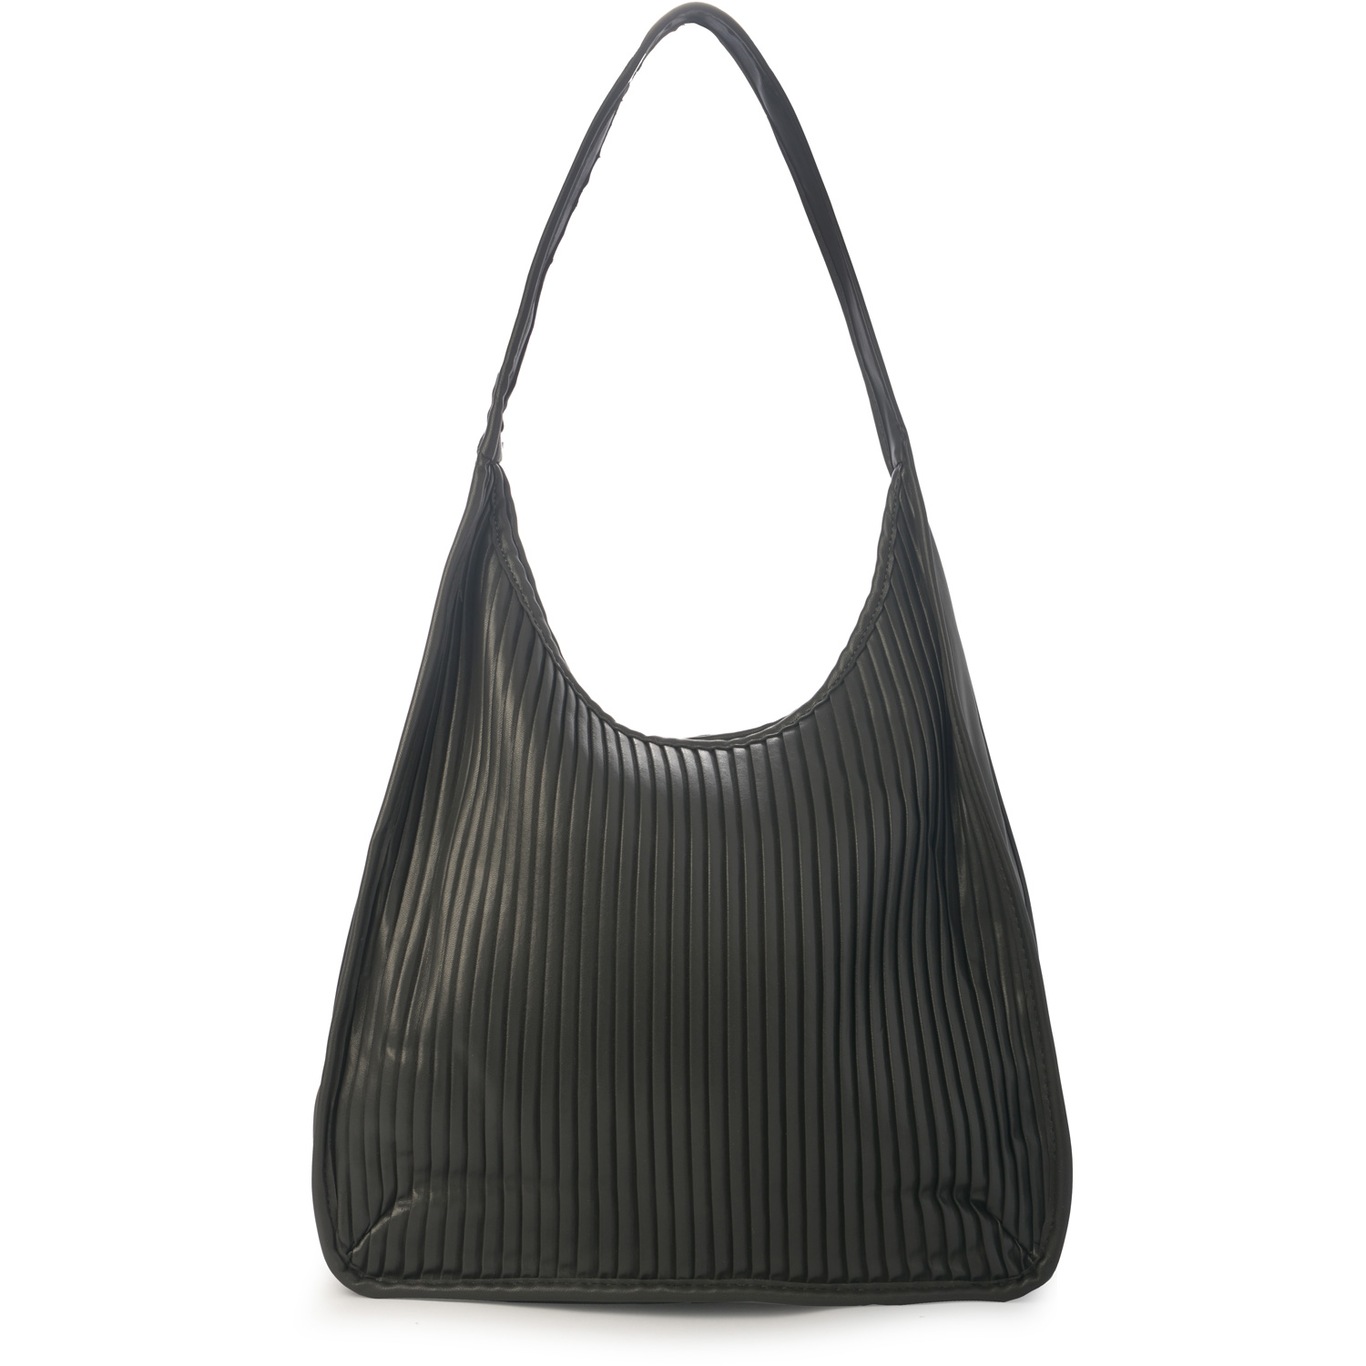 Pleated Shopper バッグ, グレー